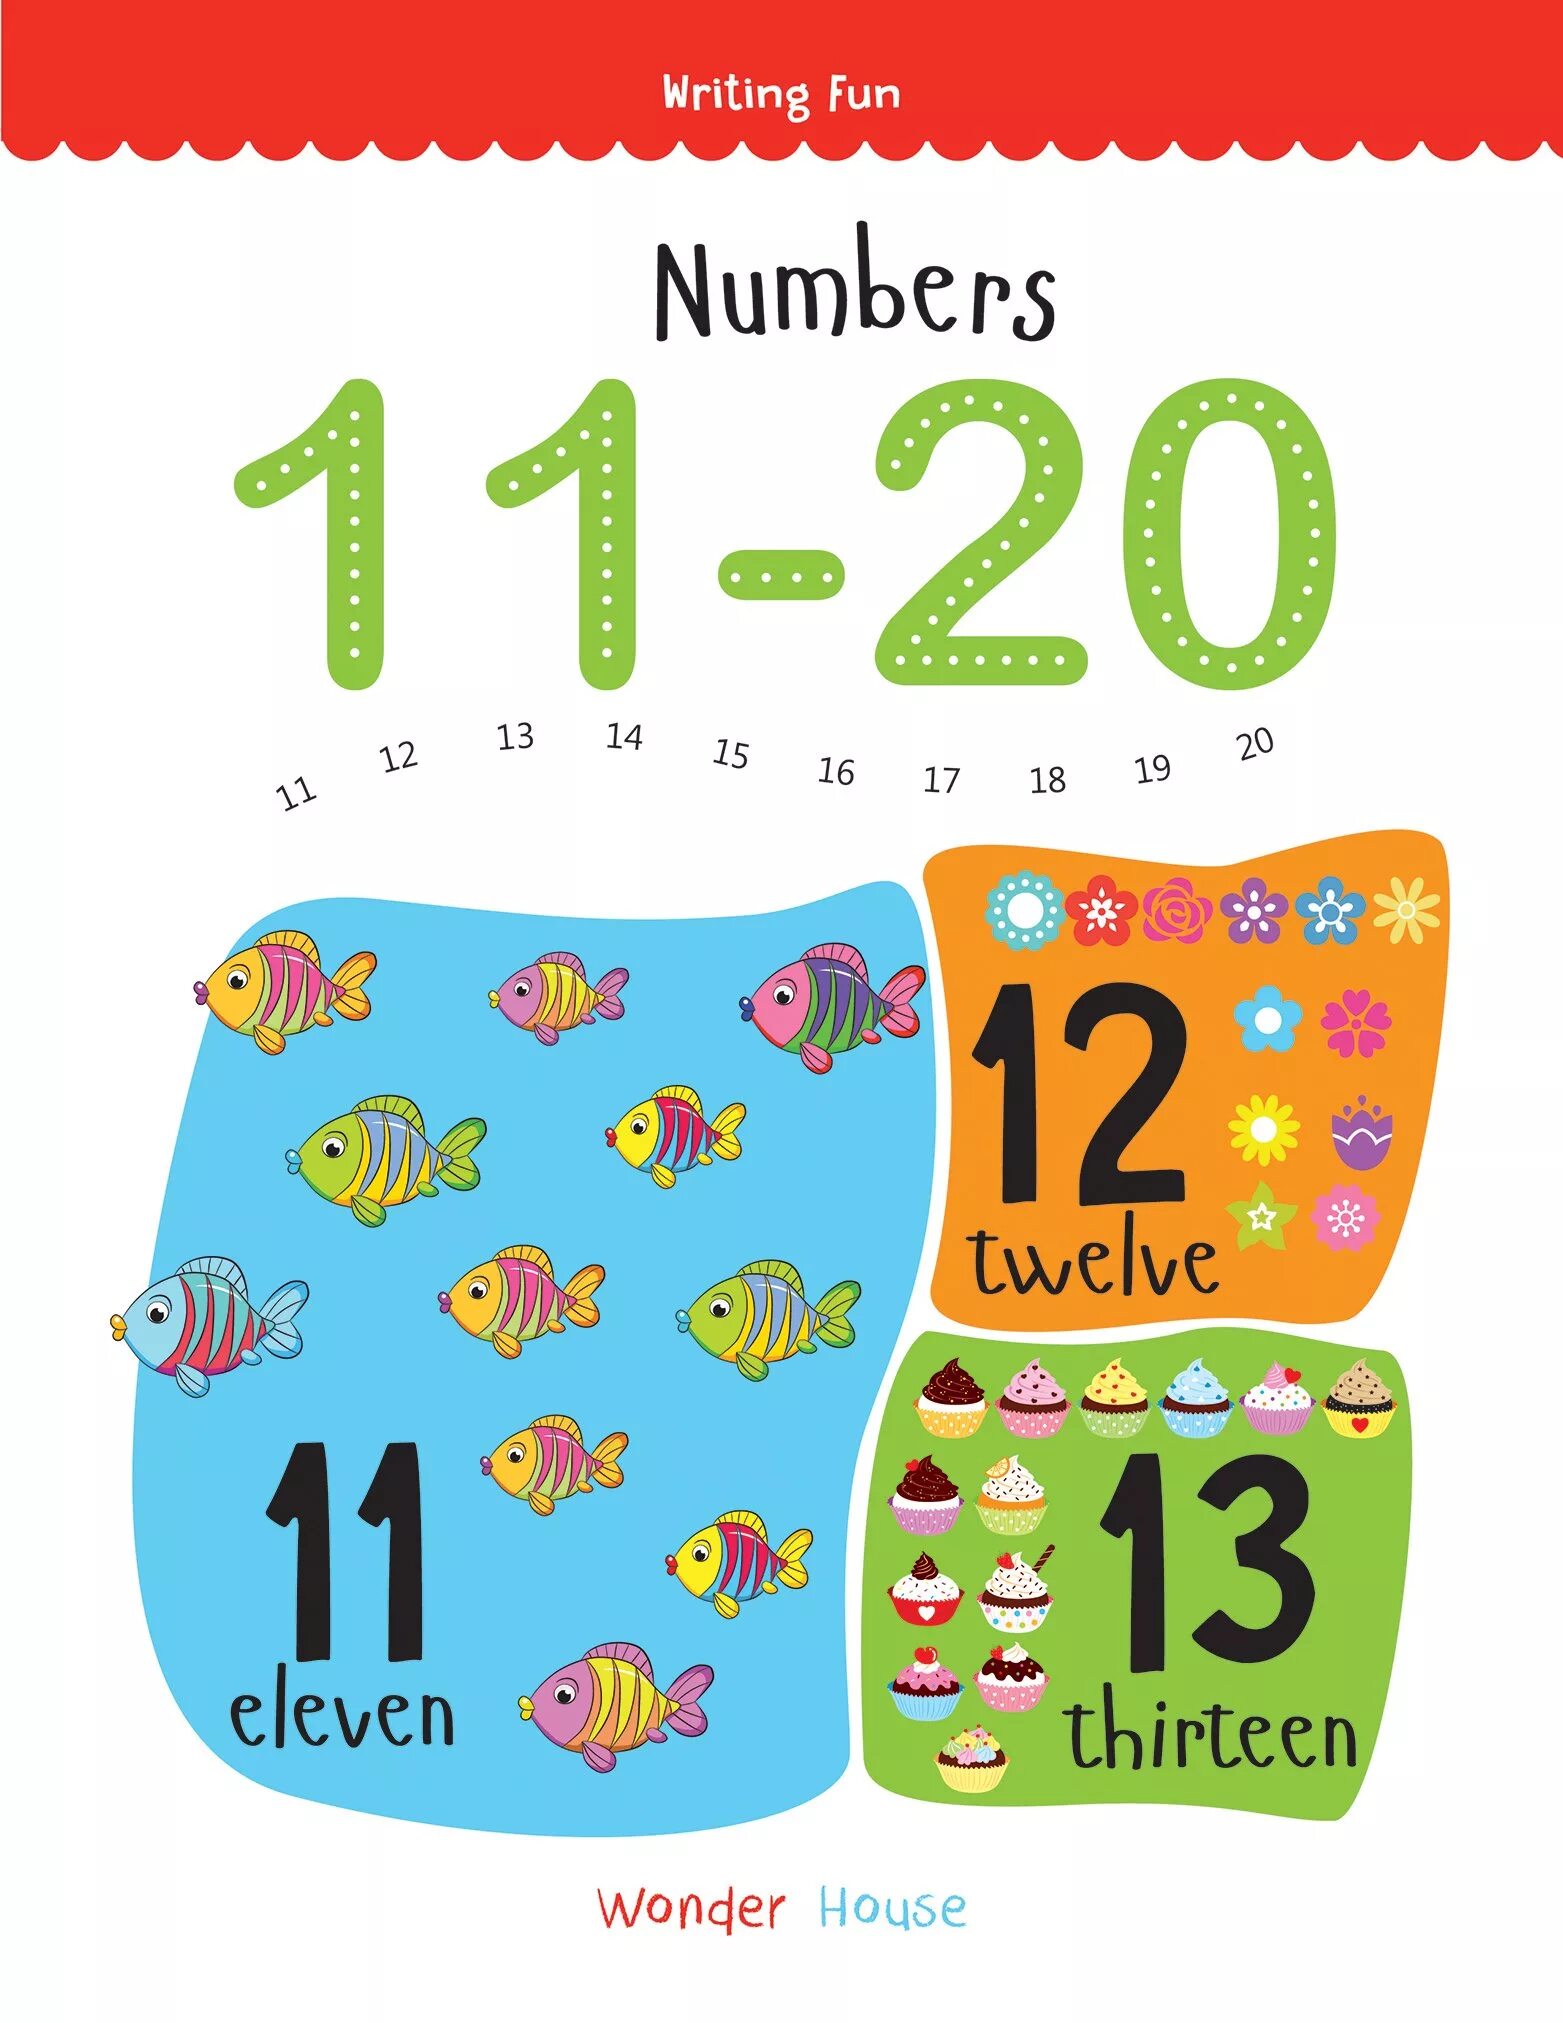 Numbers 11-20. Цифры 11-20 на английском. Number 11. Numbers from 11 to 20. 5 11 от числа 20